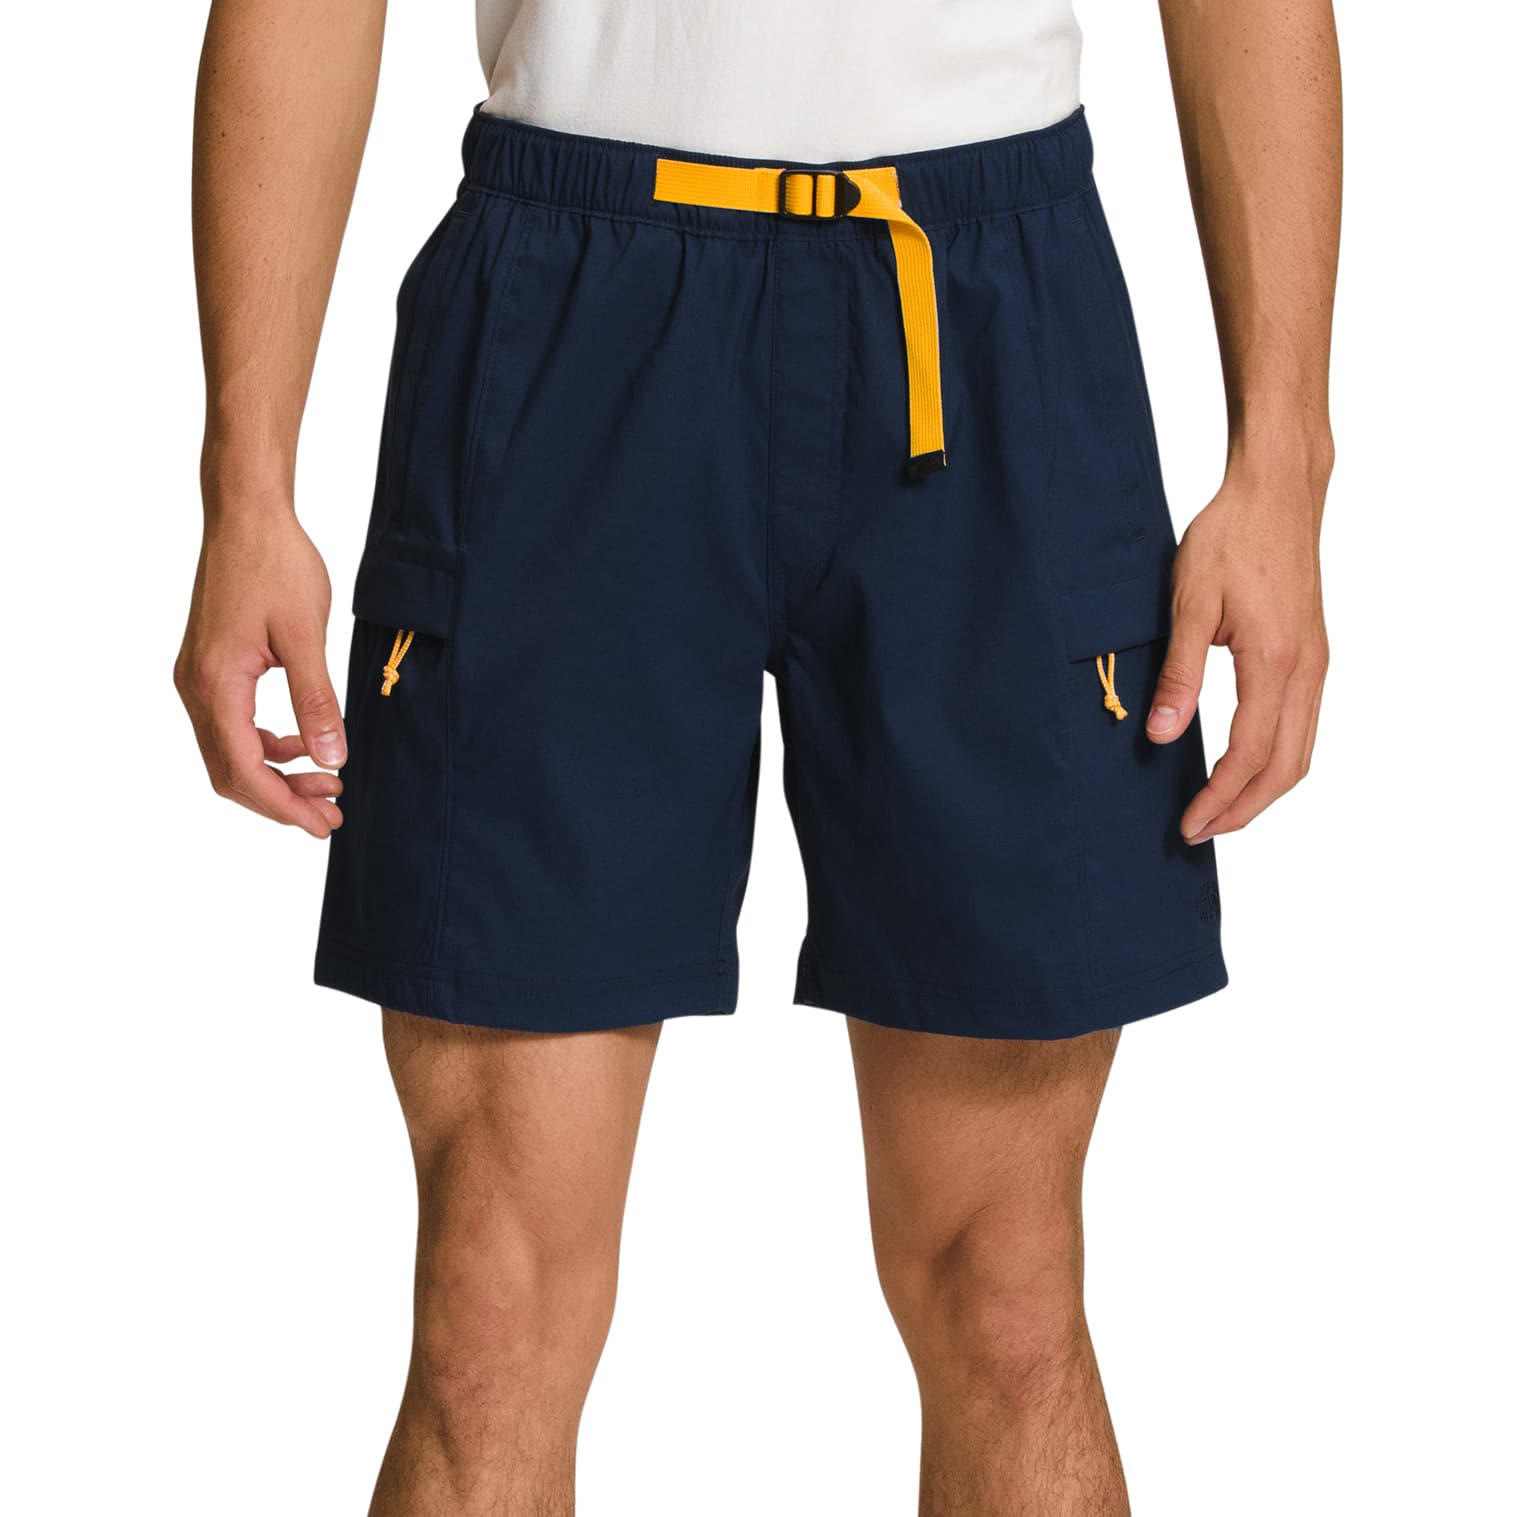 Huk Men's Pursuit Shorts (1 stores) see prices now »